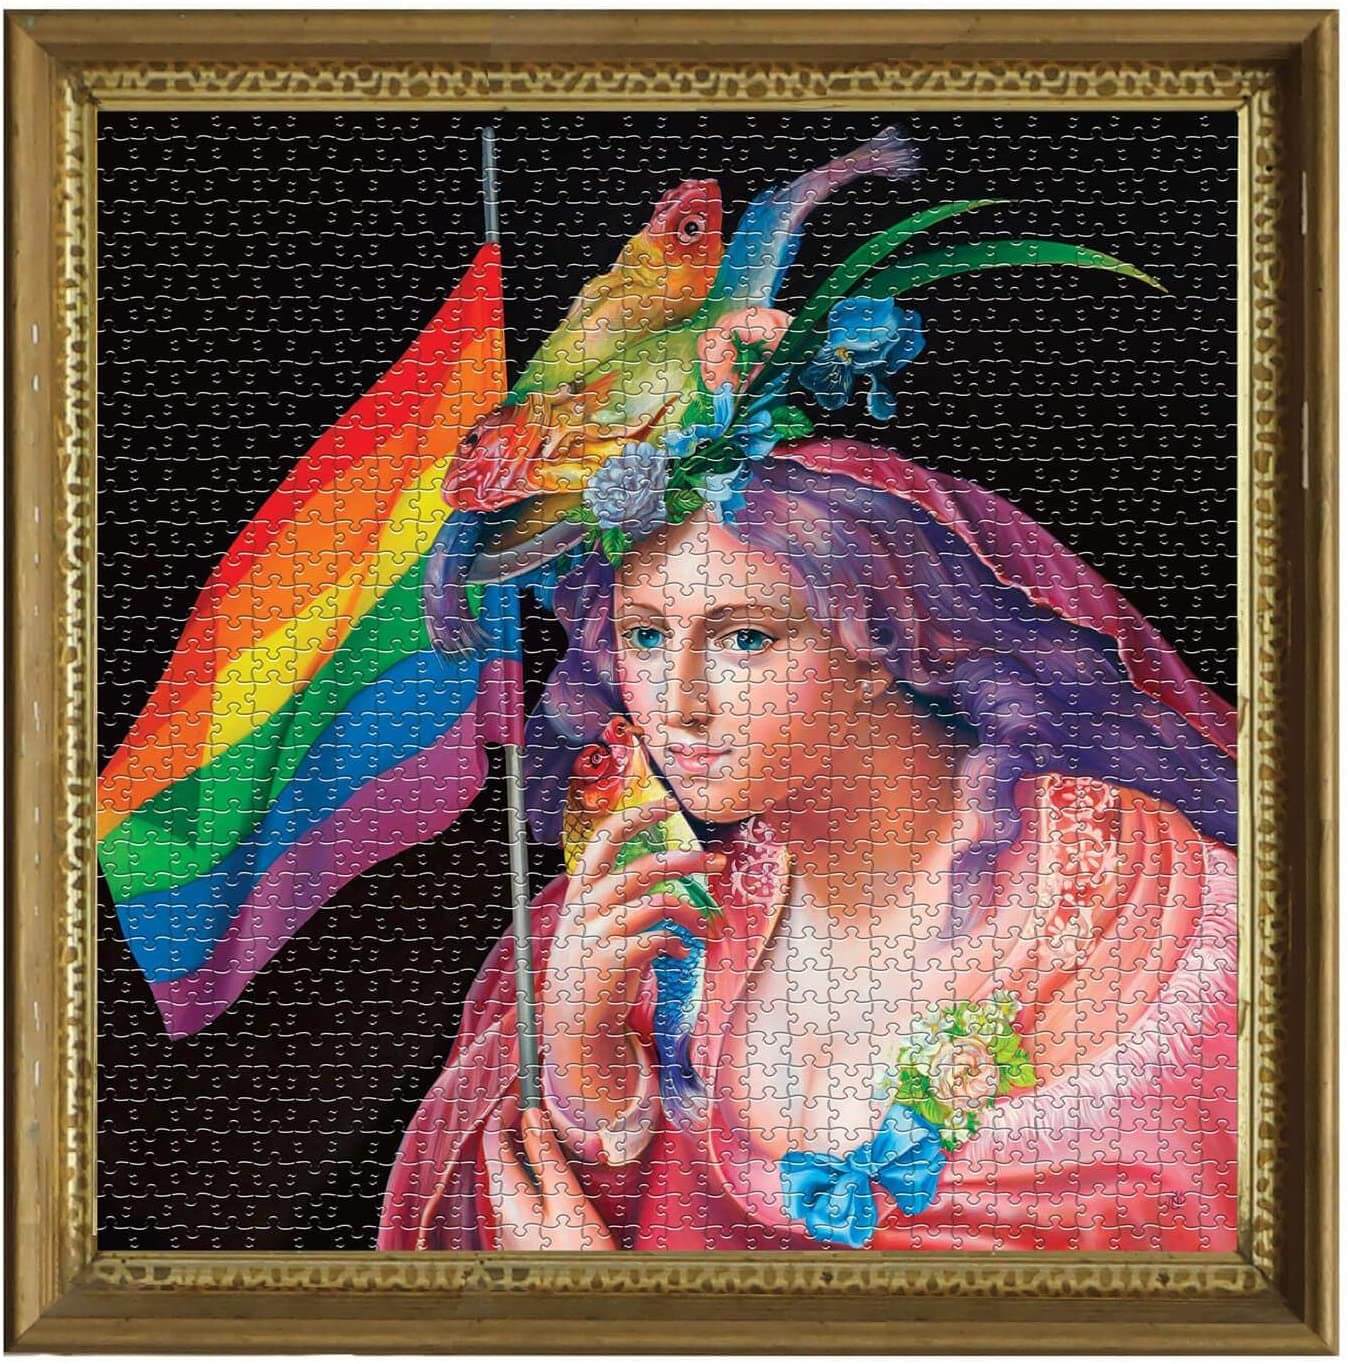 eeBoo - Piece and Love Liberty Rainbow 1000 piece square adult Jigsaw Puzzle completed puzzle in picture frame